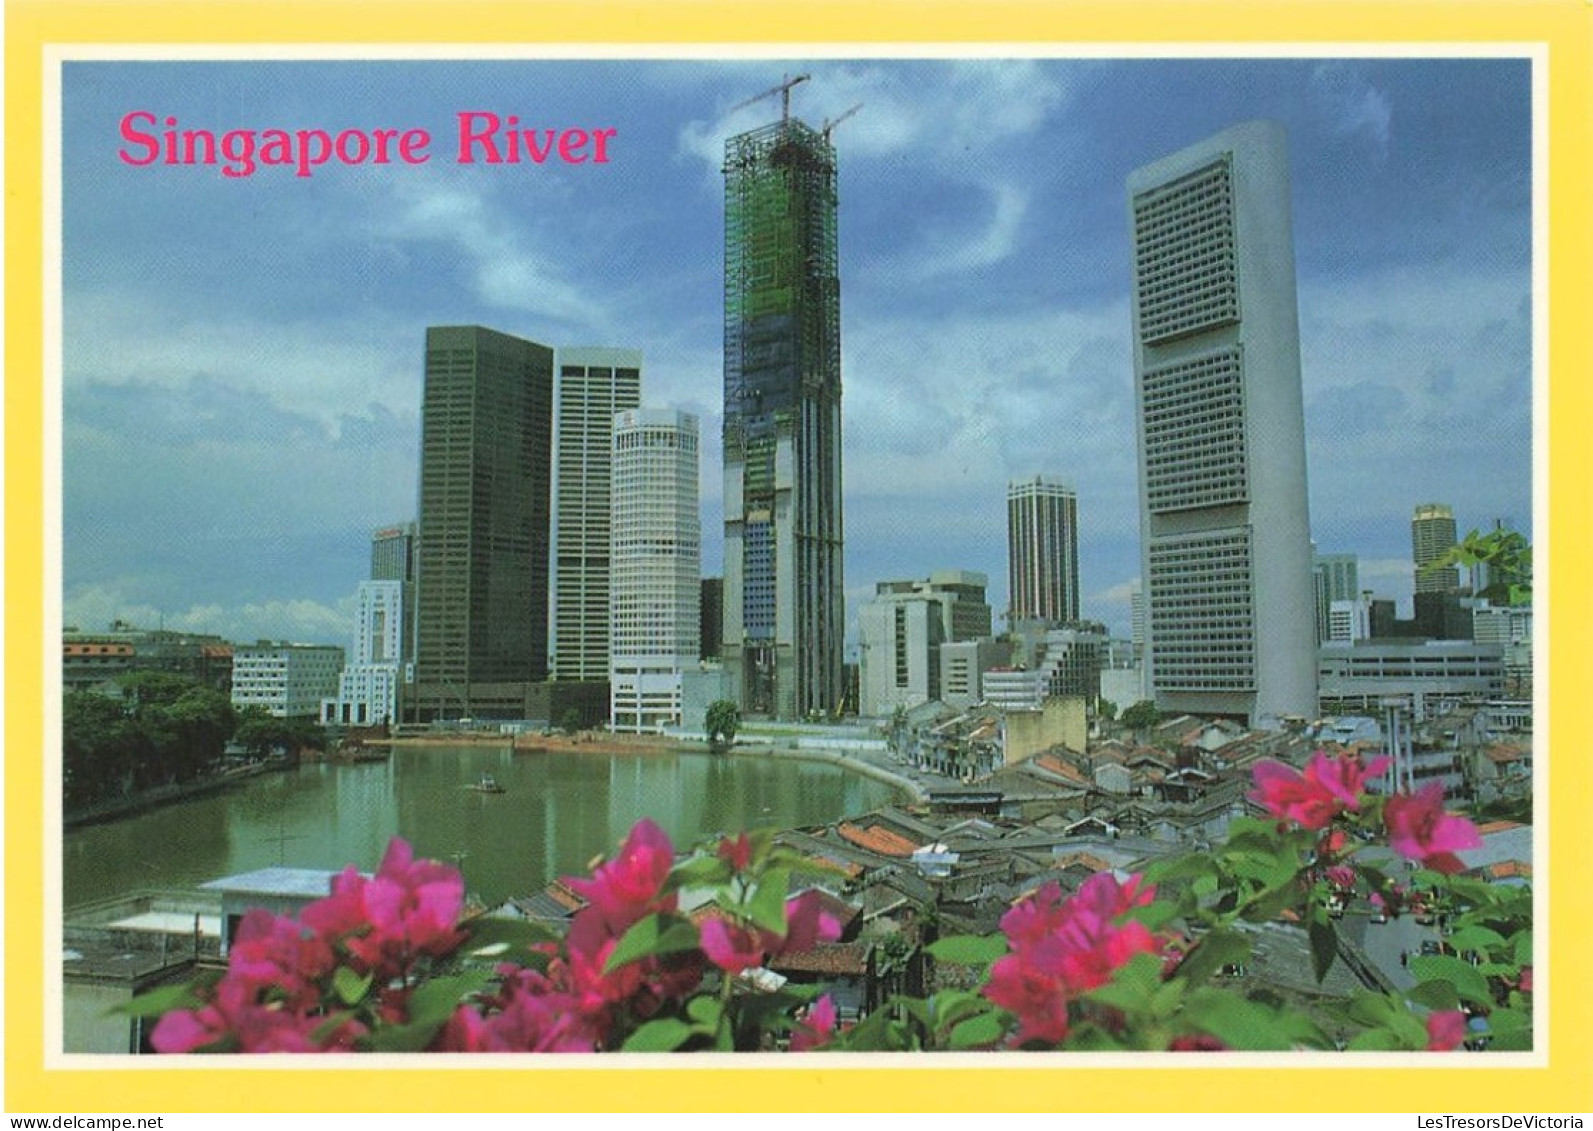 SINGAPOUR - Picturesque View Of Towering Skyscrapers And Old Buildings Alongside The Singapore River - Carte Postale - Singapour